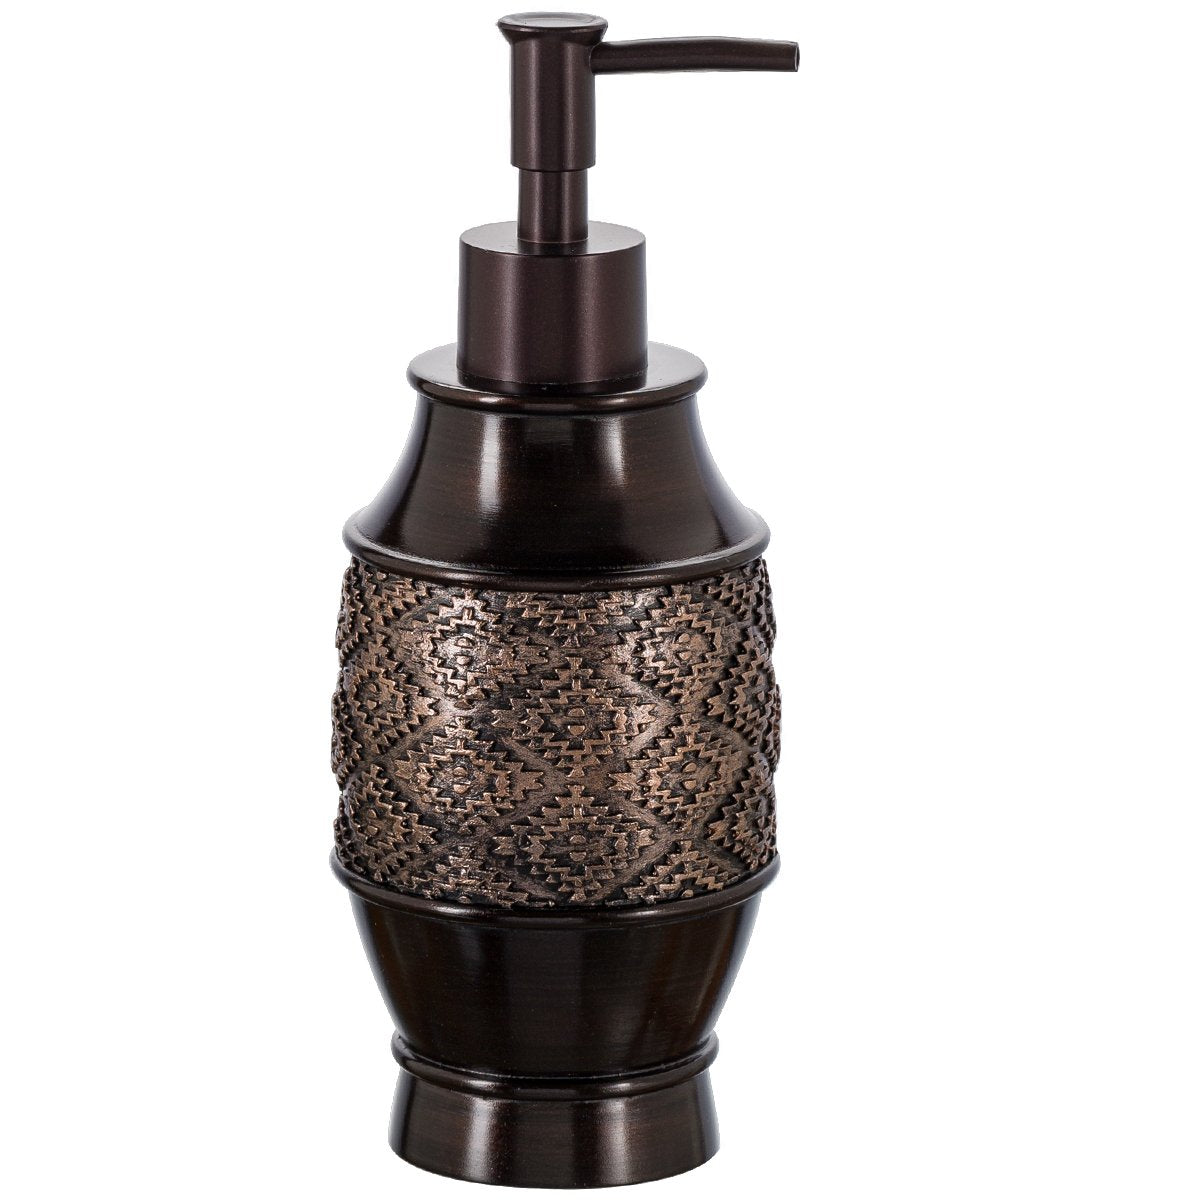 Creative Scents Brown Soap Dispenser for Bathroom - Decorative Lotion Dispenser with Durable Matching Pump for Countertop - Modern Liquid Soap Dispenser Holds 8 Oz. (Dublin Collection)  - Like New